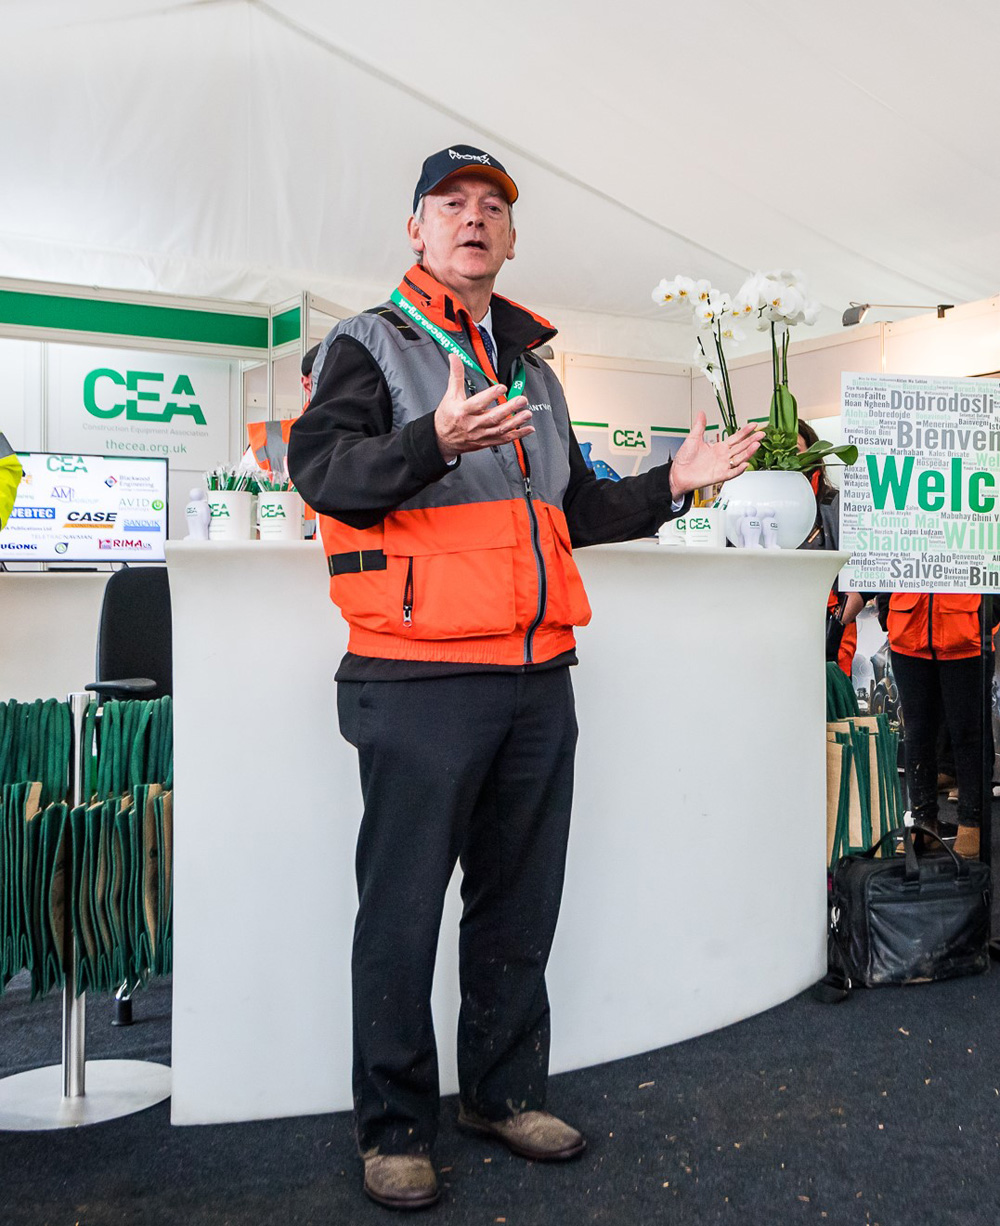 Rob Oliver speaking on the CEA stand at PlantWorx